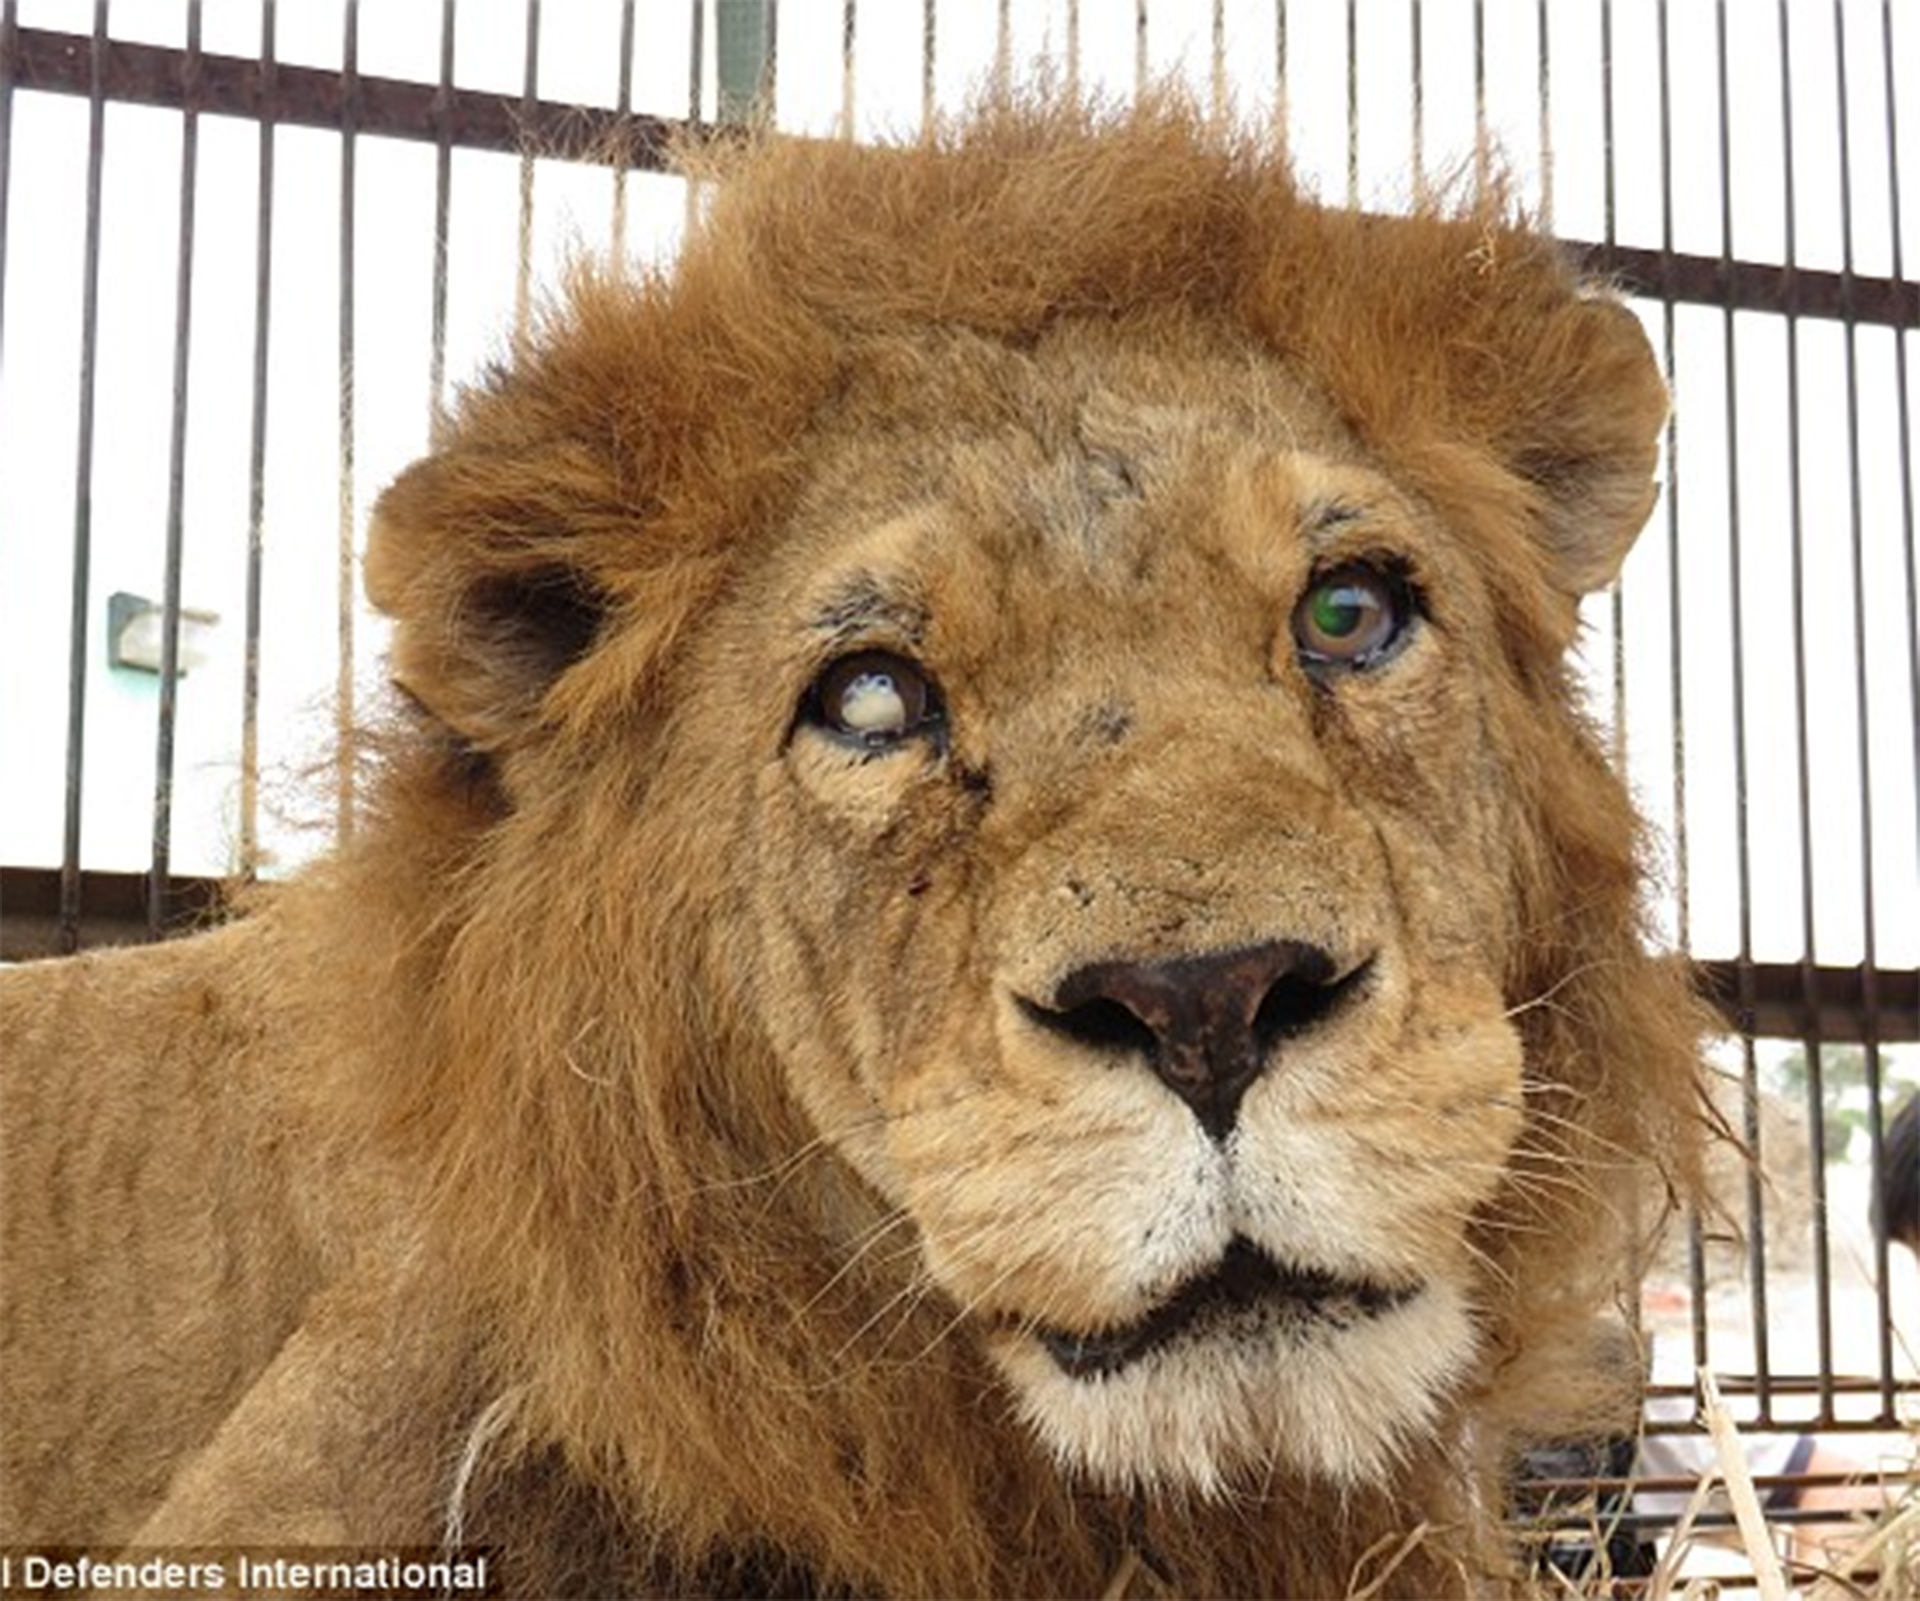 Blind lion rescued from underground circus